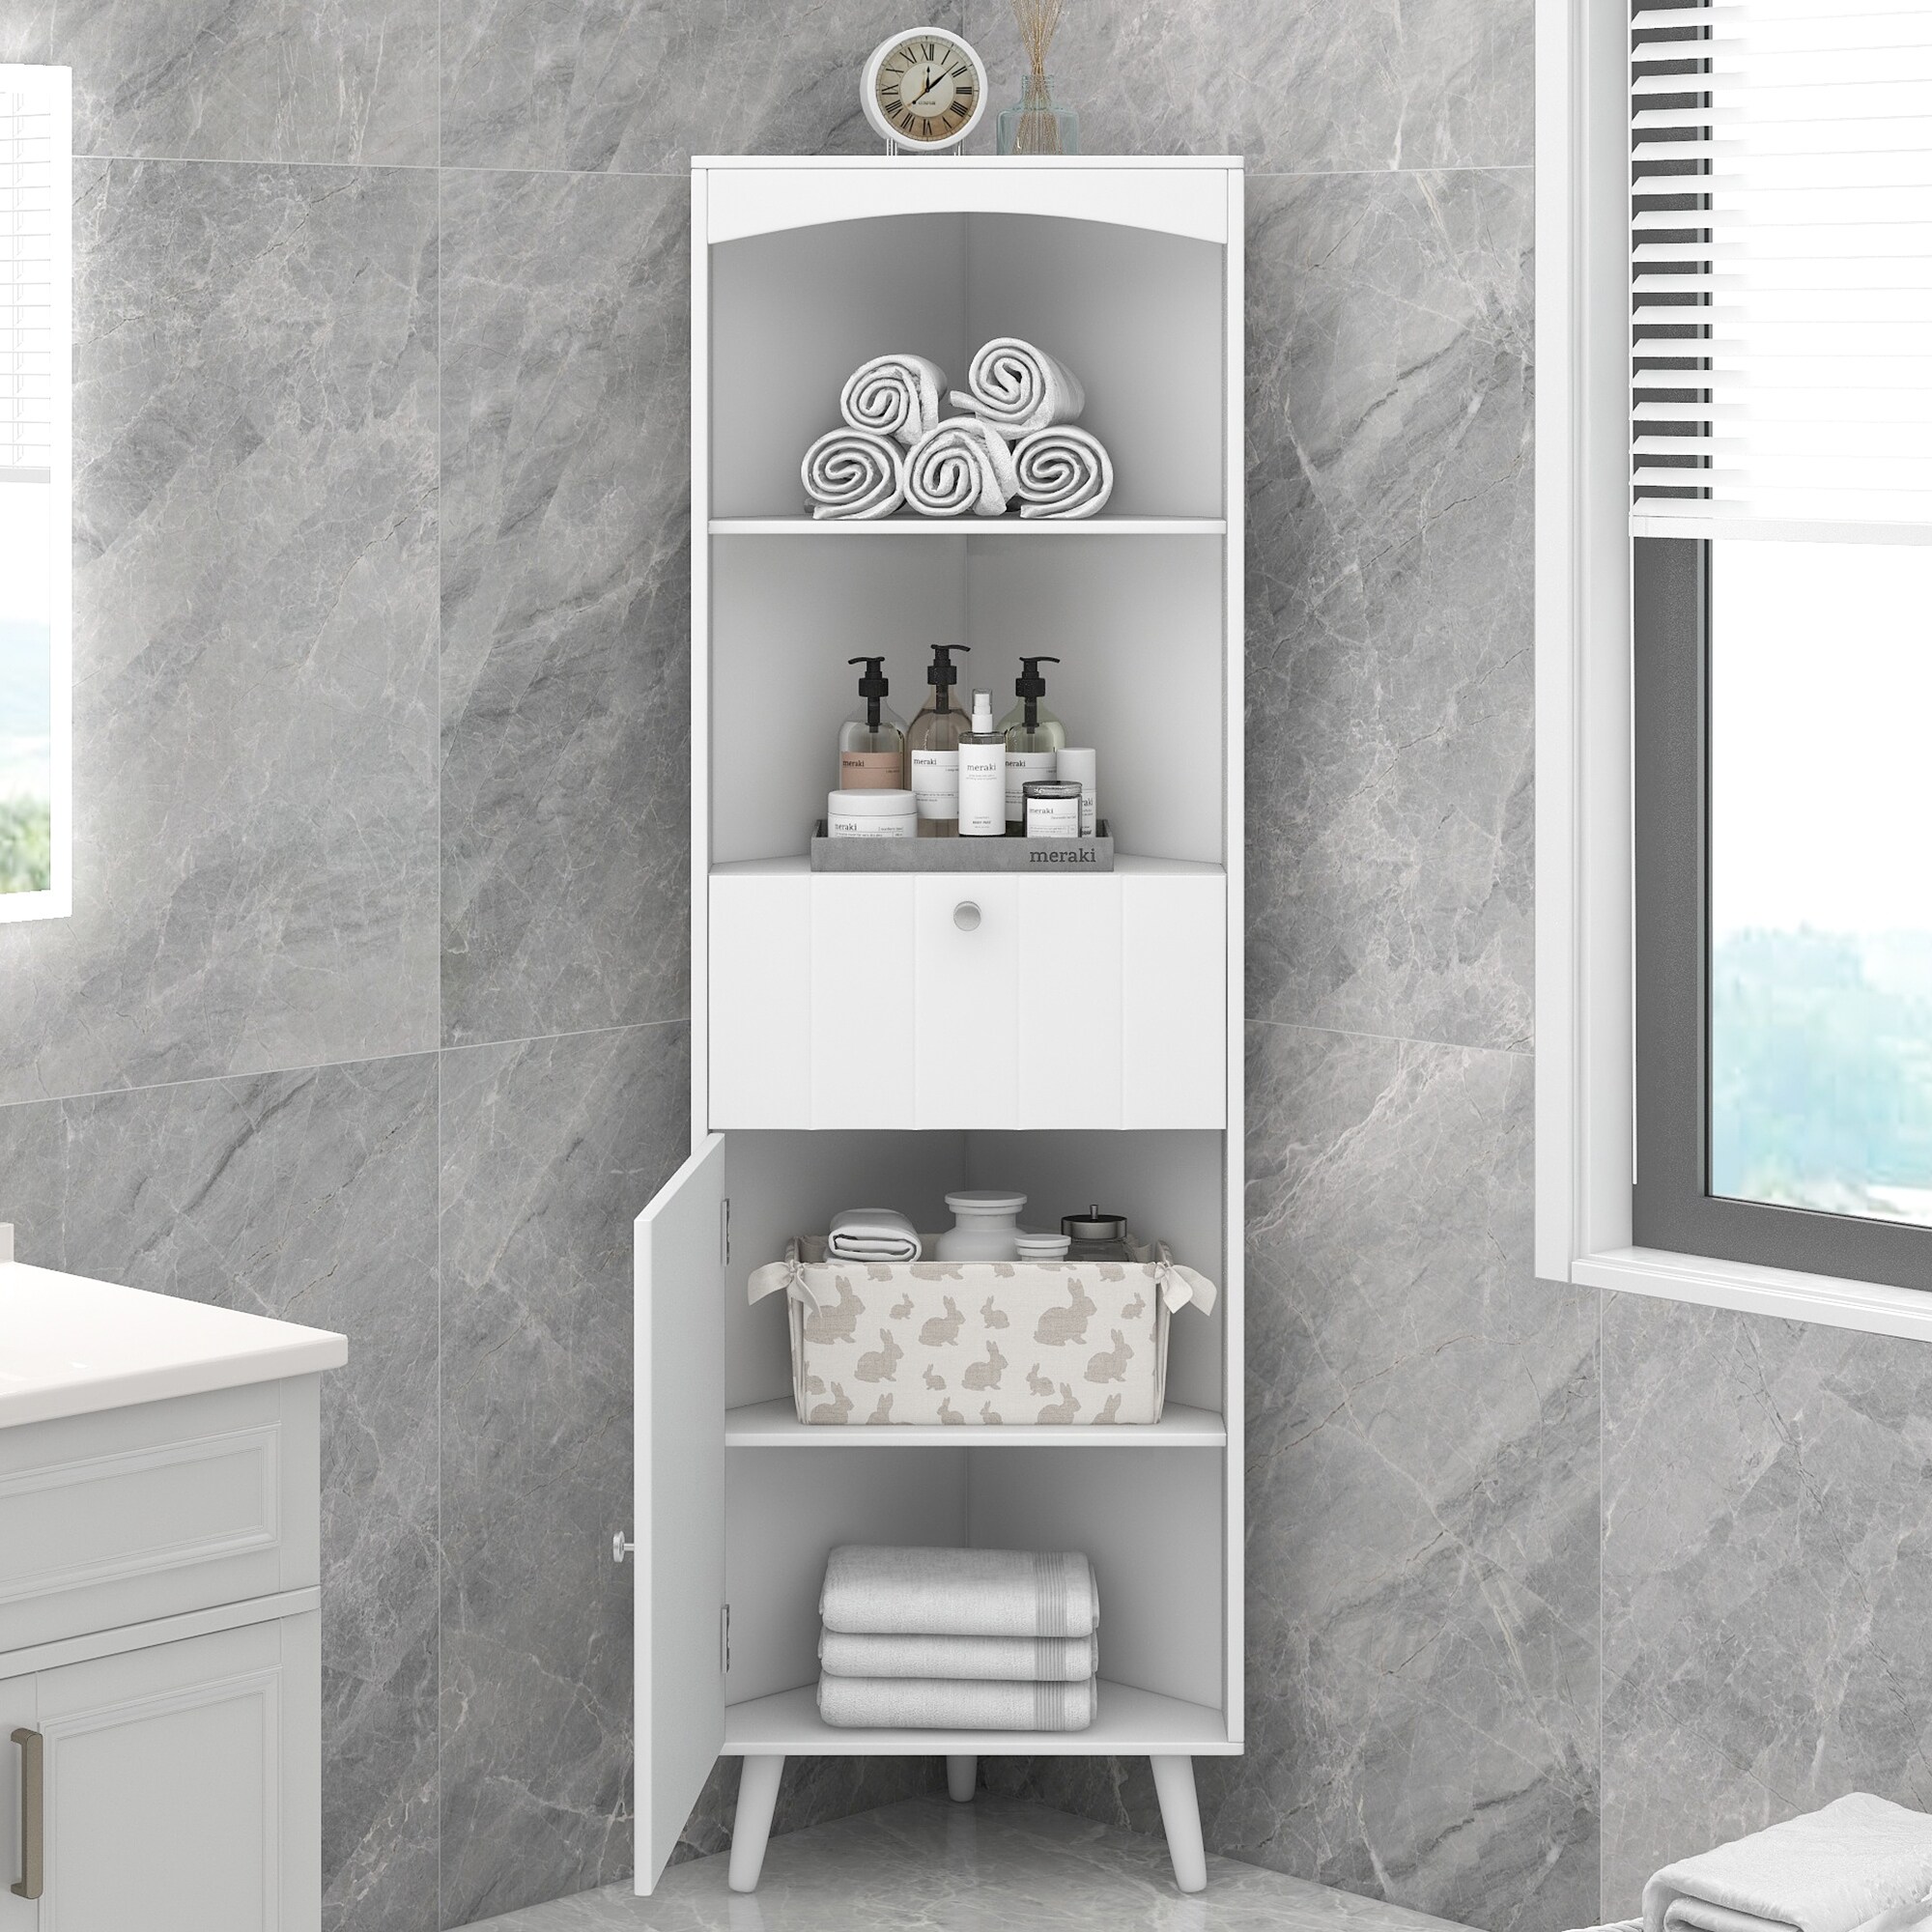 https://ak1.ostkcdn.com/images/products/is/images/direct/448004a491f7d288cc3db98c015fd8dea5f83fd0/Triangle-Corner-Floor-Storage-Organizer-Cabinet-with-Open-Shelves%2C-Modern-Freestanding-Paper-Holder-Plant-Stand-Linen-Cabinet.jpg